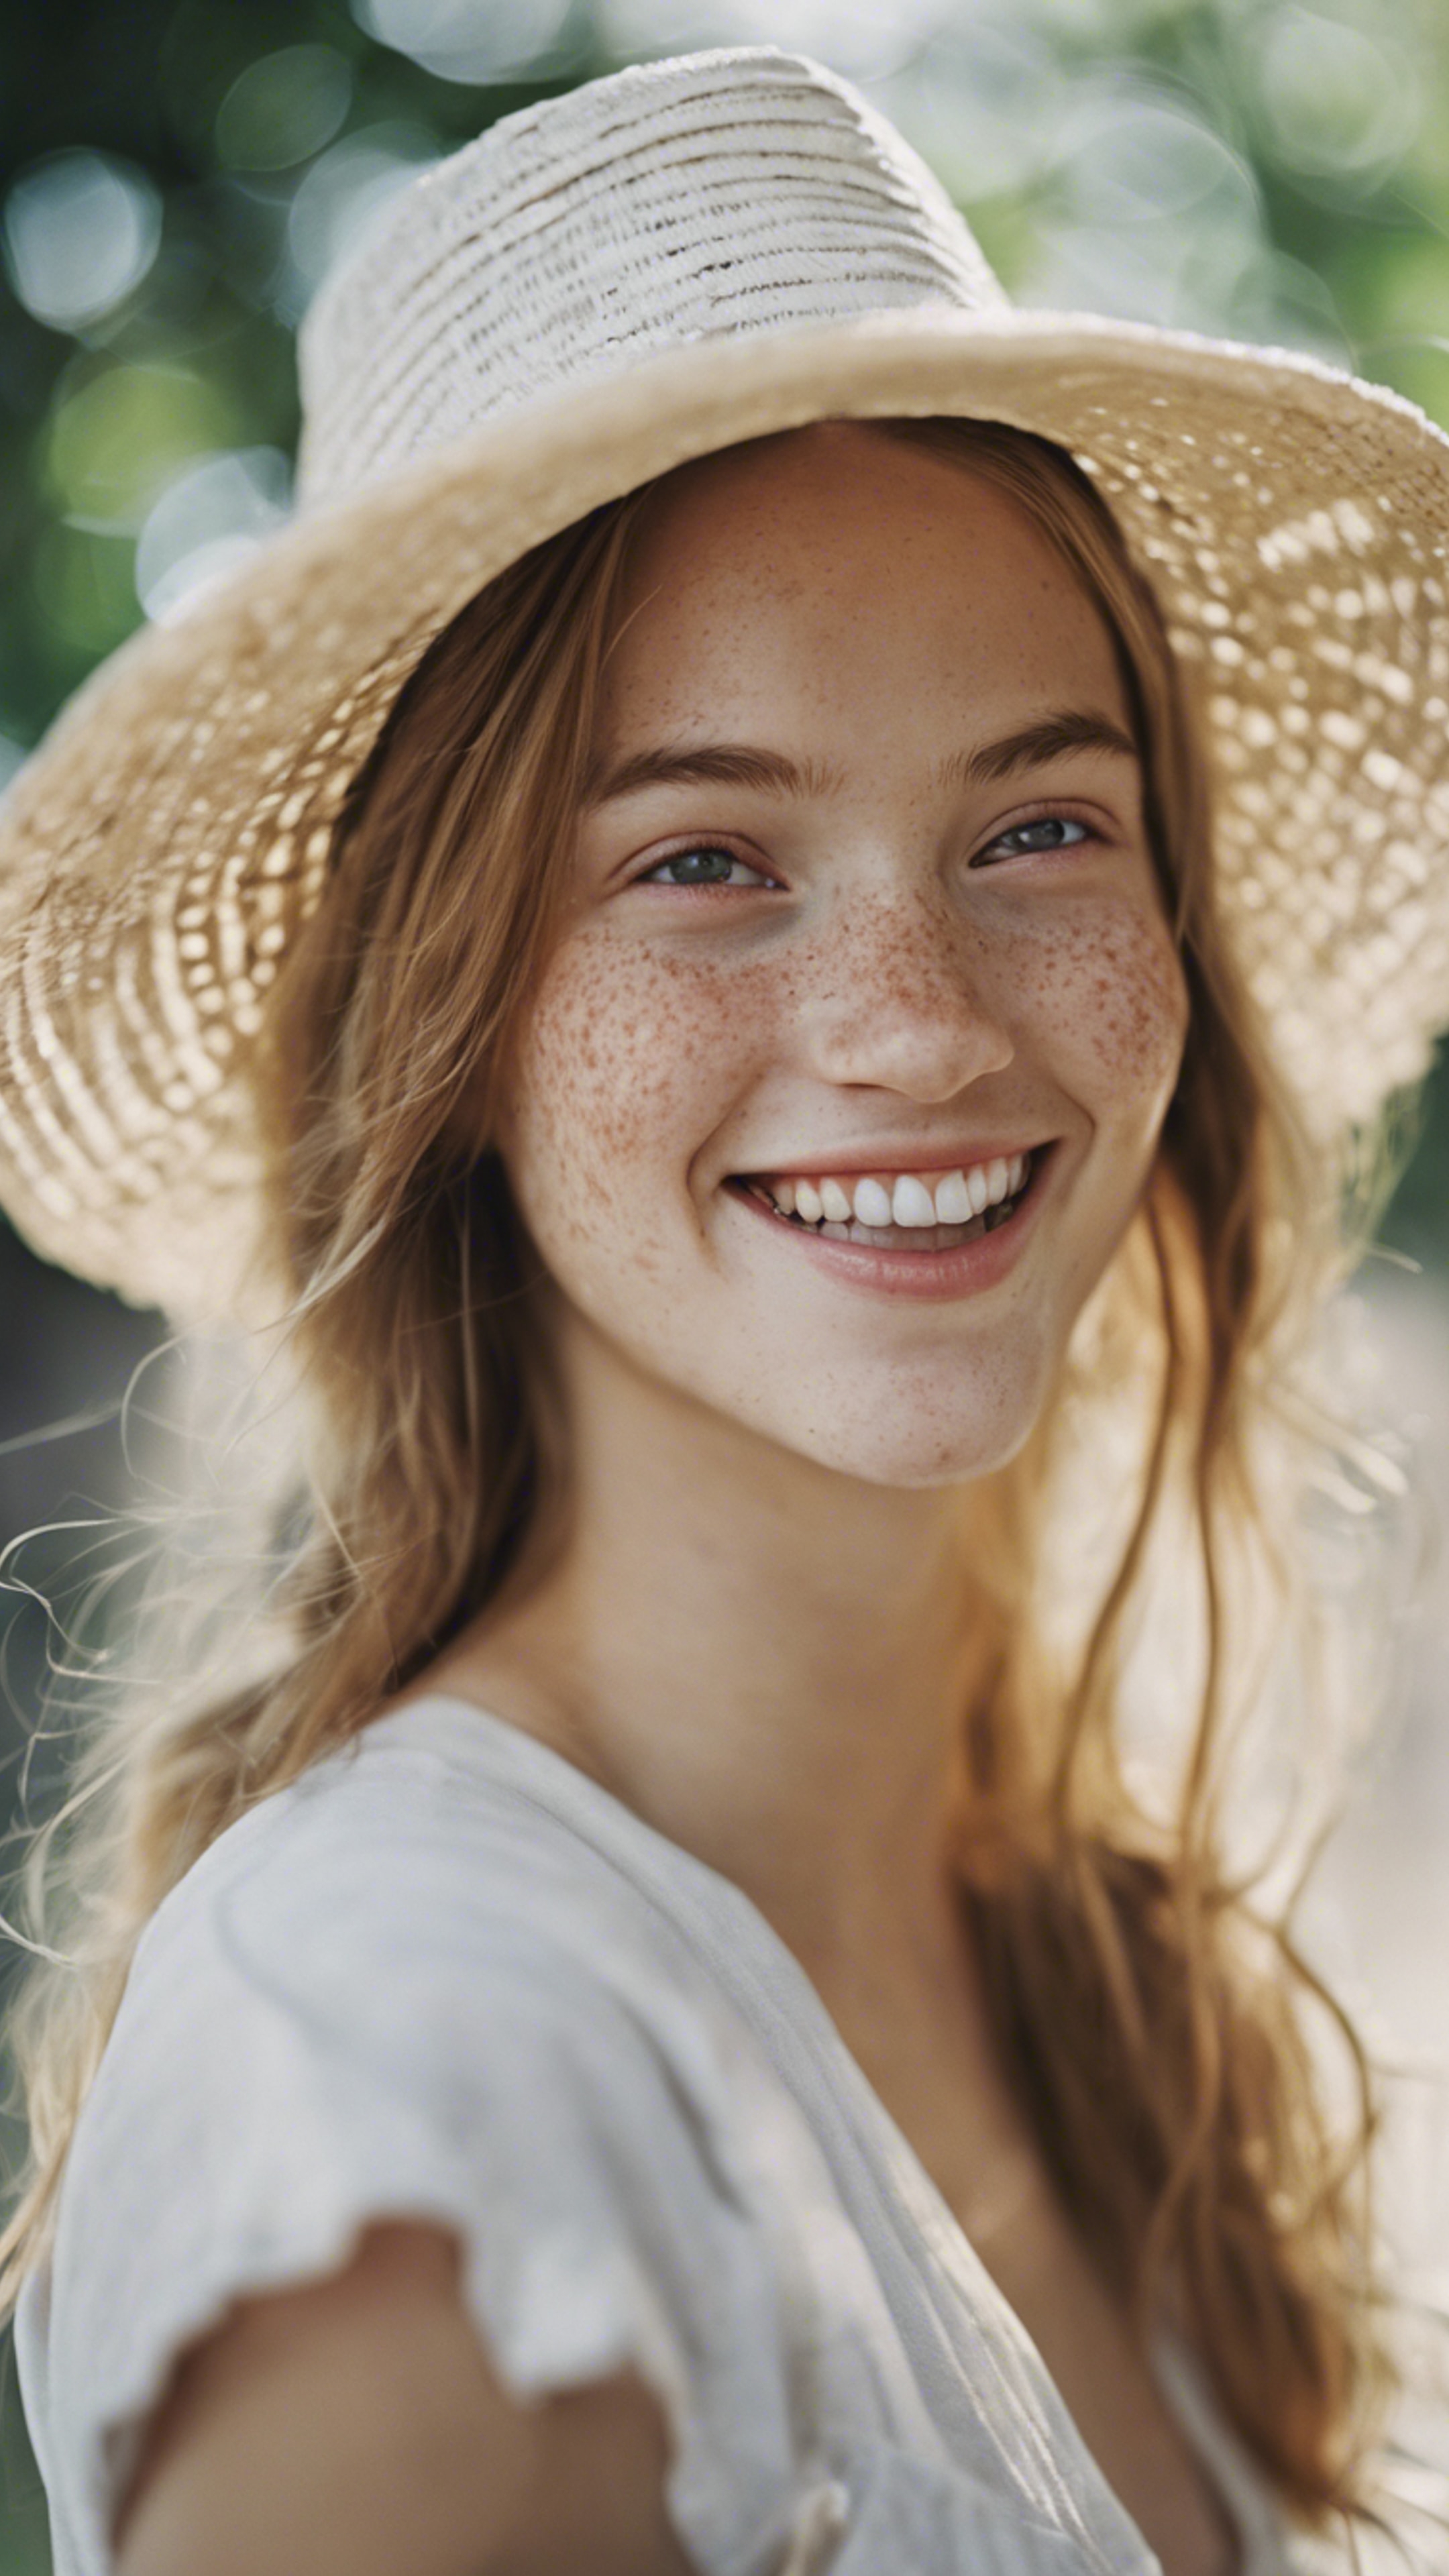 A portrait of a cute girl with freckles and a big smile, wearing a white straw hat. Behang[344e43c9fe594ea98e55]